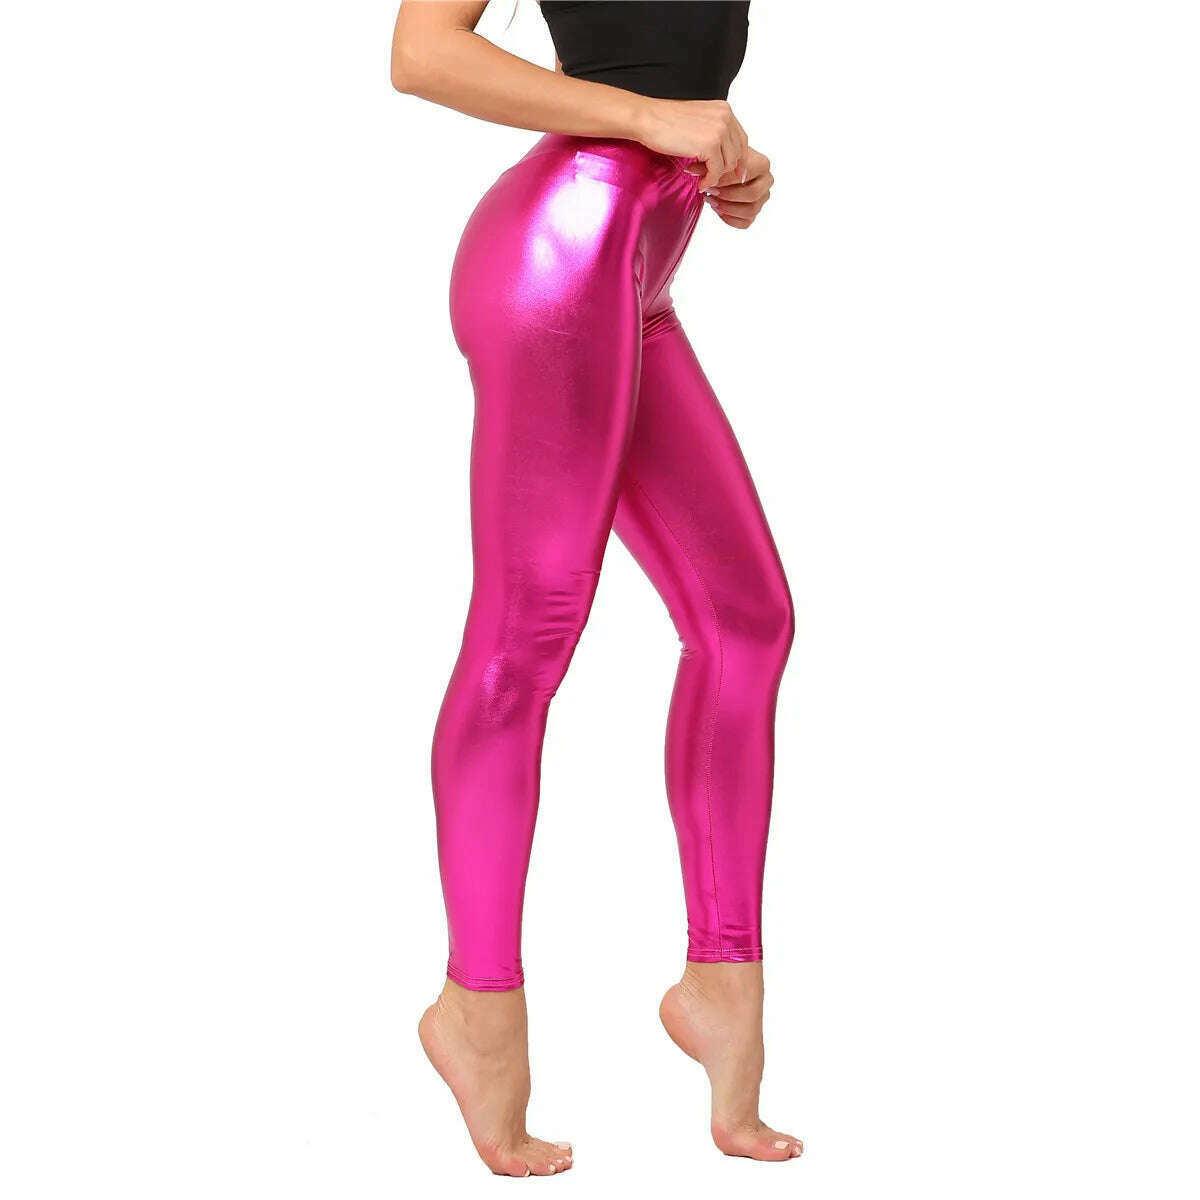 KIMLUD, Metallic Color PU Leggings Women Faux Leather Pants Dancing Party Pant Sexy Night Club Skinny Costume Pants Tight Trousers, Rose red / One size 50kg below, KIMLUD Womens Clothes